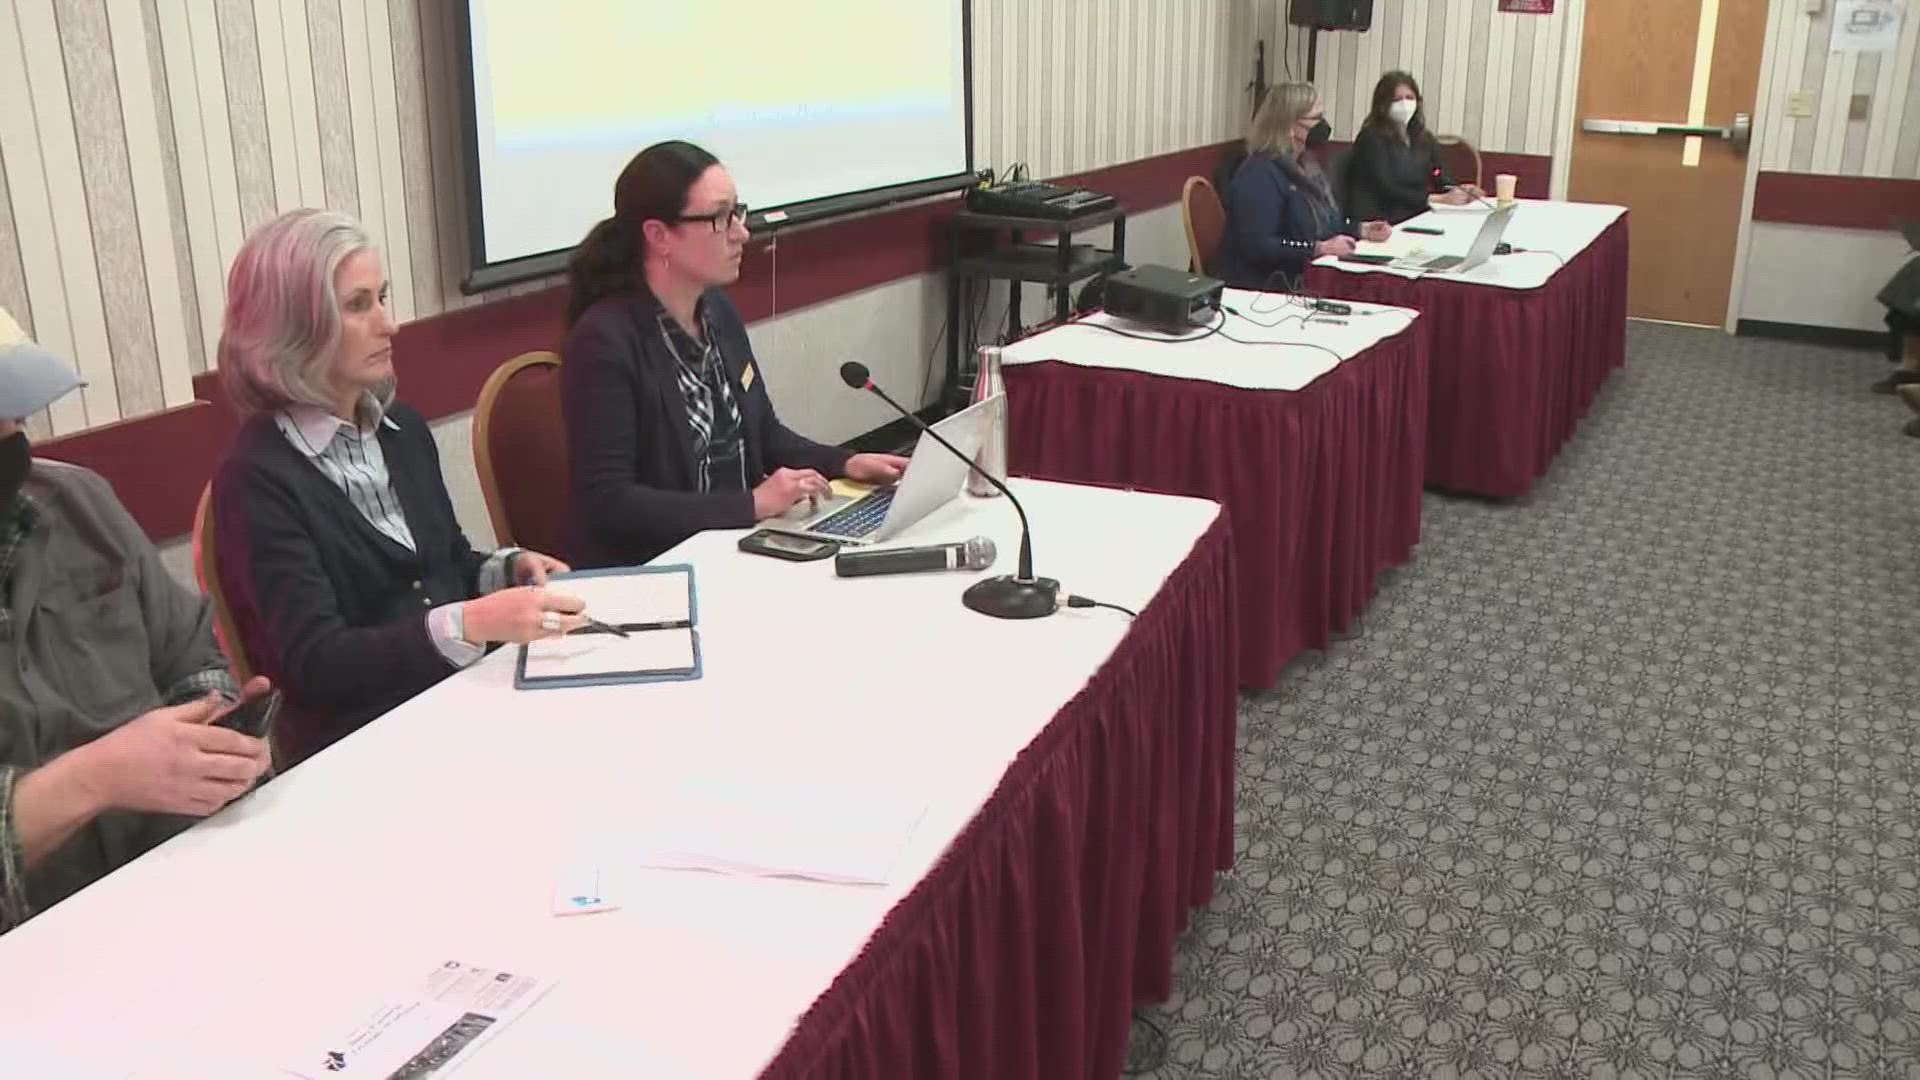 Maine farmers grappling with the impact of contamination from toxic chemicals known as PFAS also had a chance to testify before a committee.